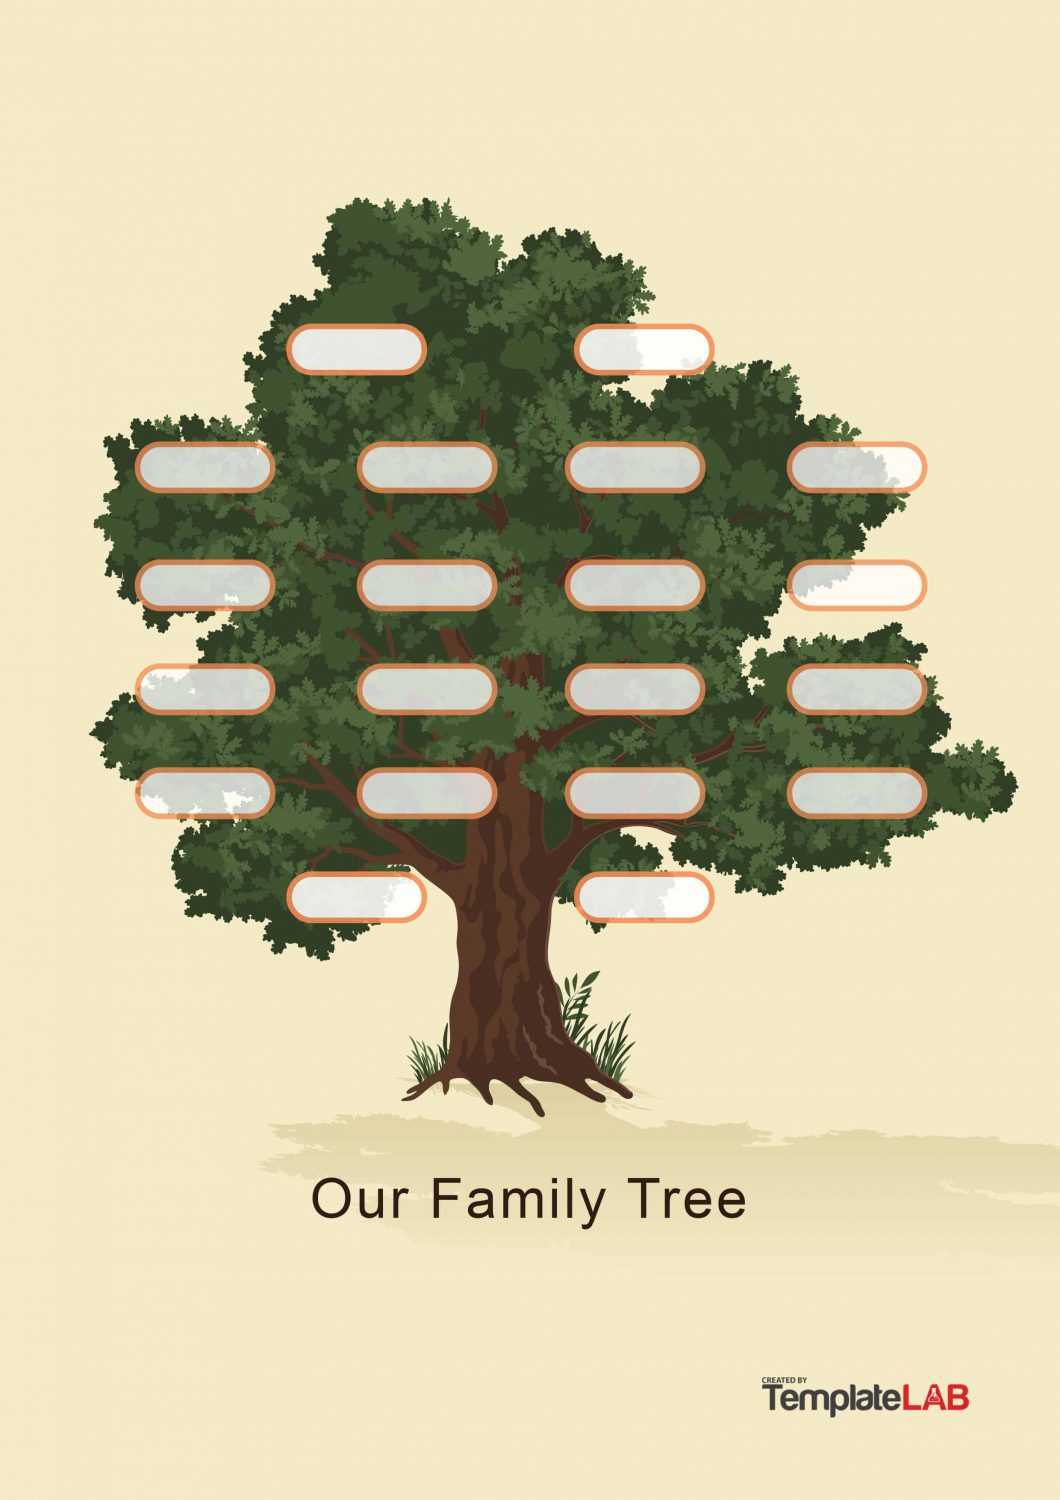 50+ Free Family Tree Templates (Word, Excel, Pdf) ᐅ Pertaining To 3 Generation Family Tree Template Word